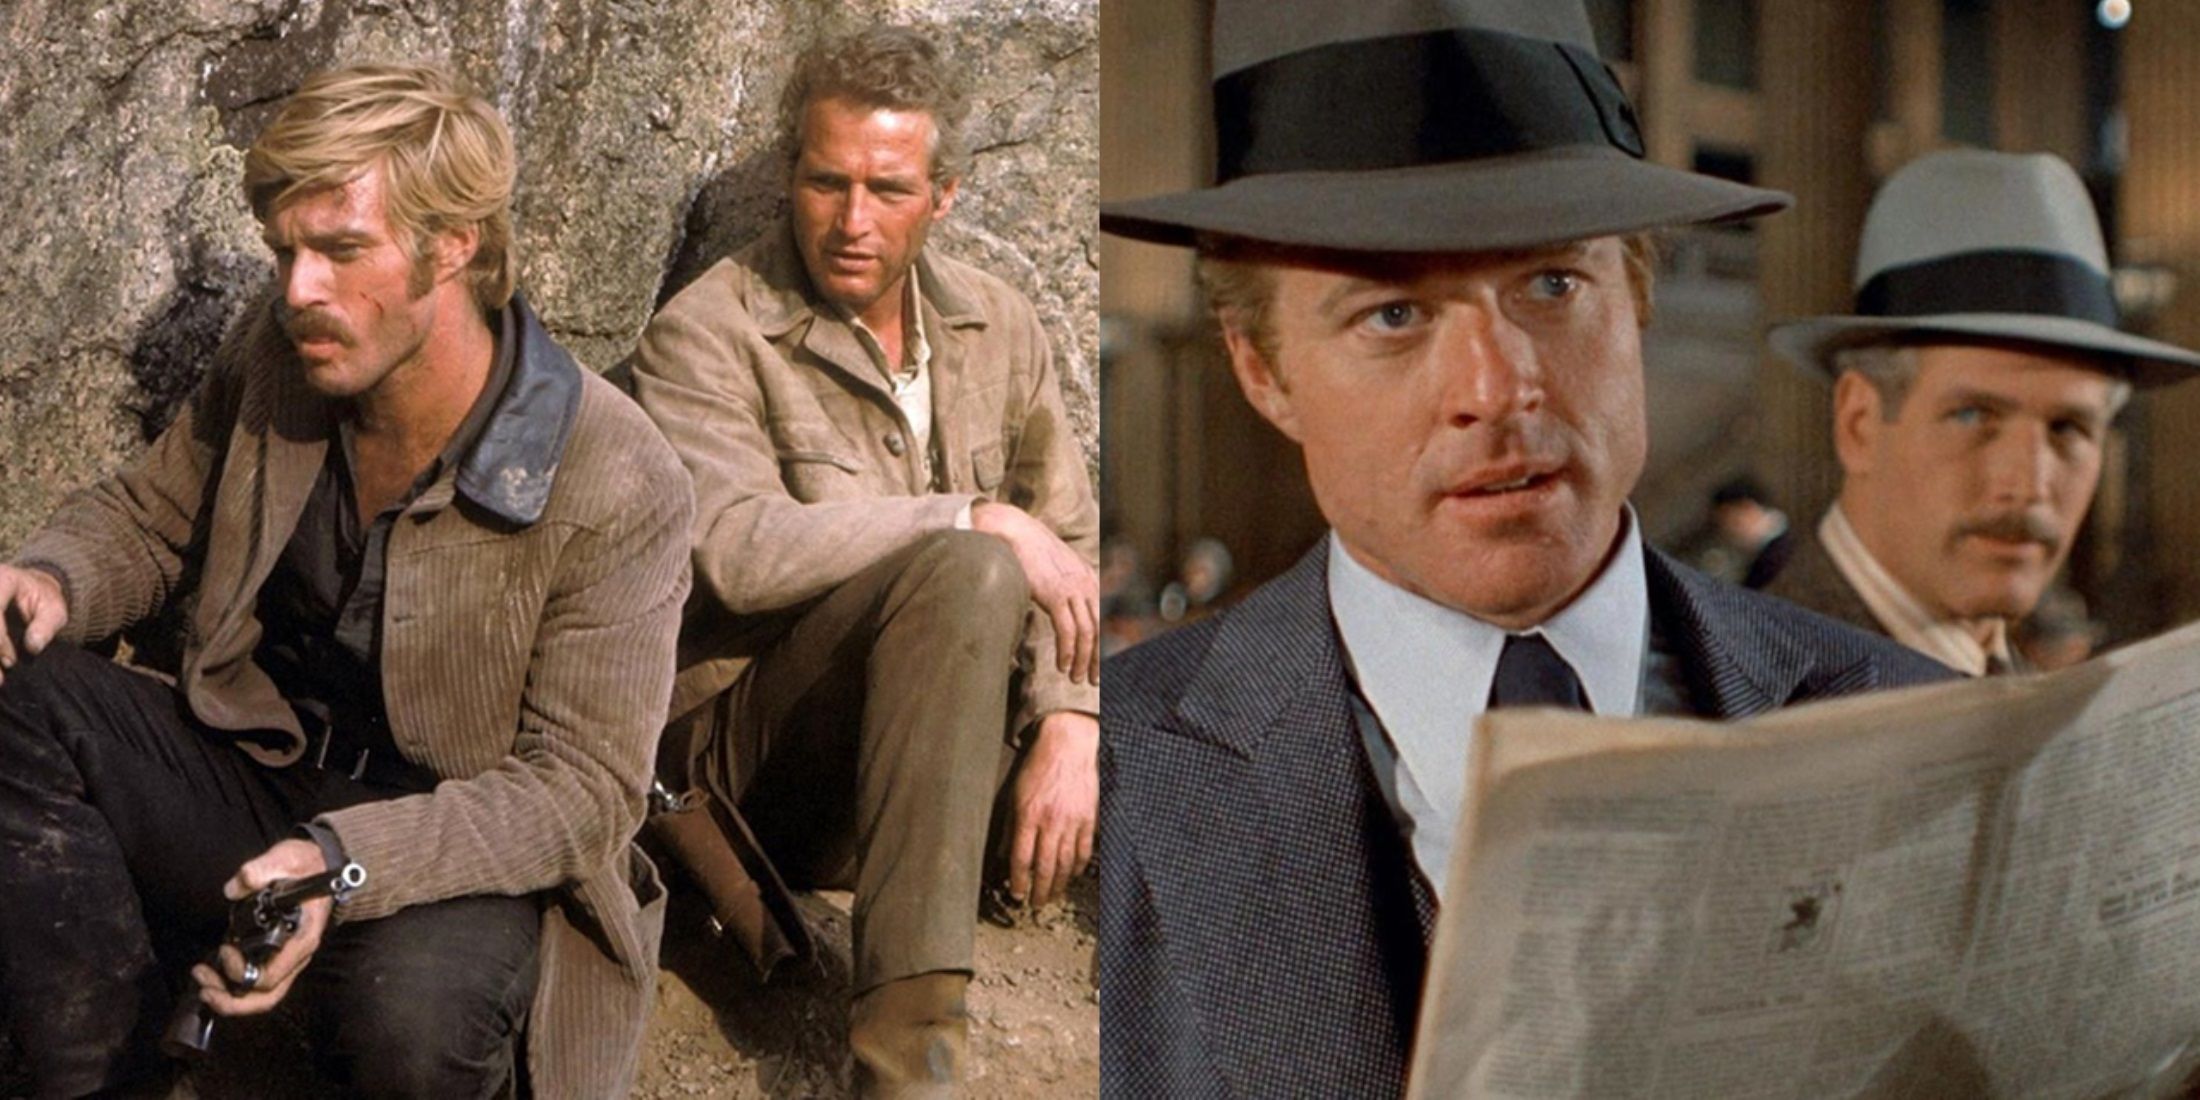 Split image of Paul Newman and Robert Redford in Butch Cassidy and the Sundance Kid and The Sting